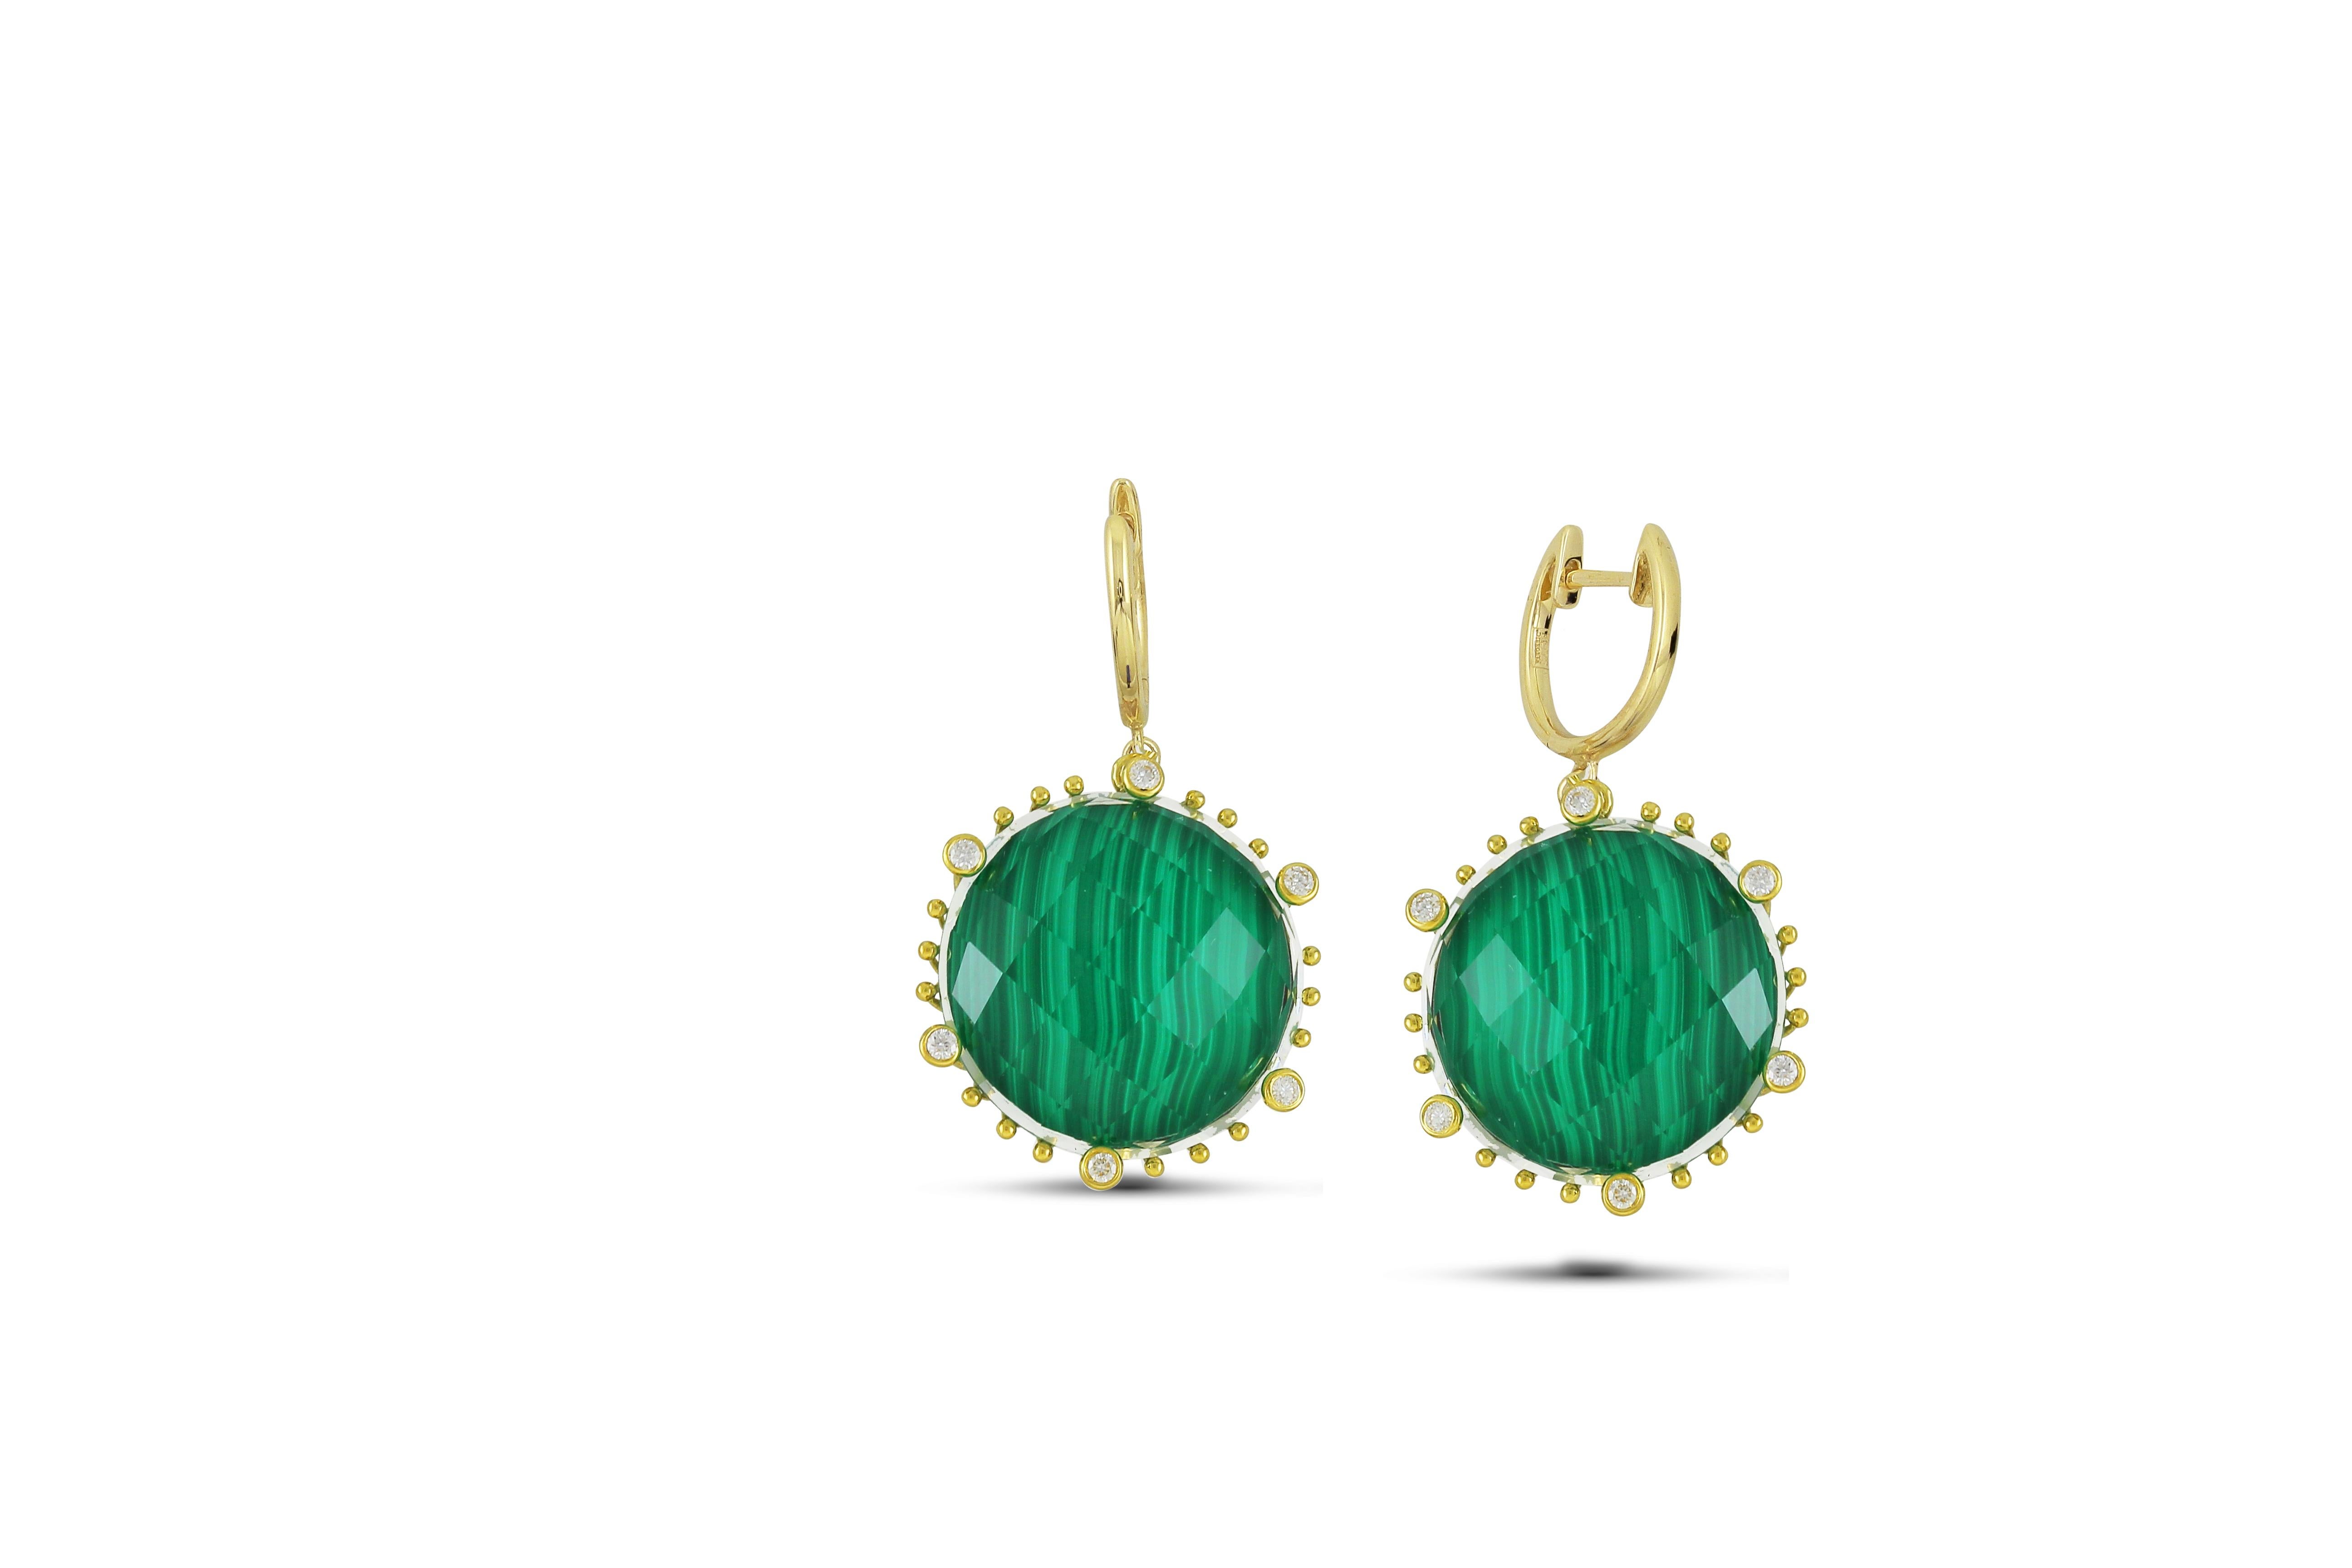 Contemporary Frederic Sage 50.74 Carat Malachite Earrings